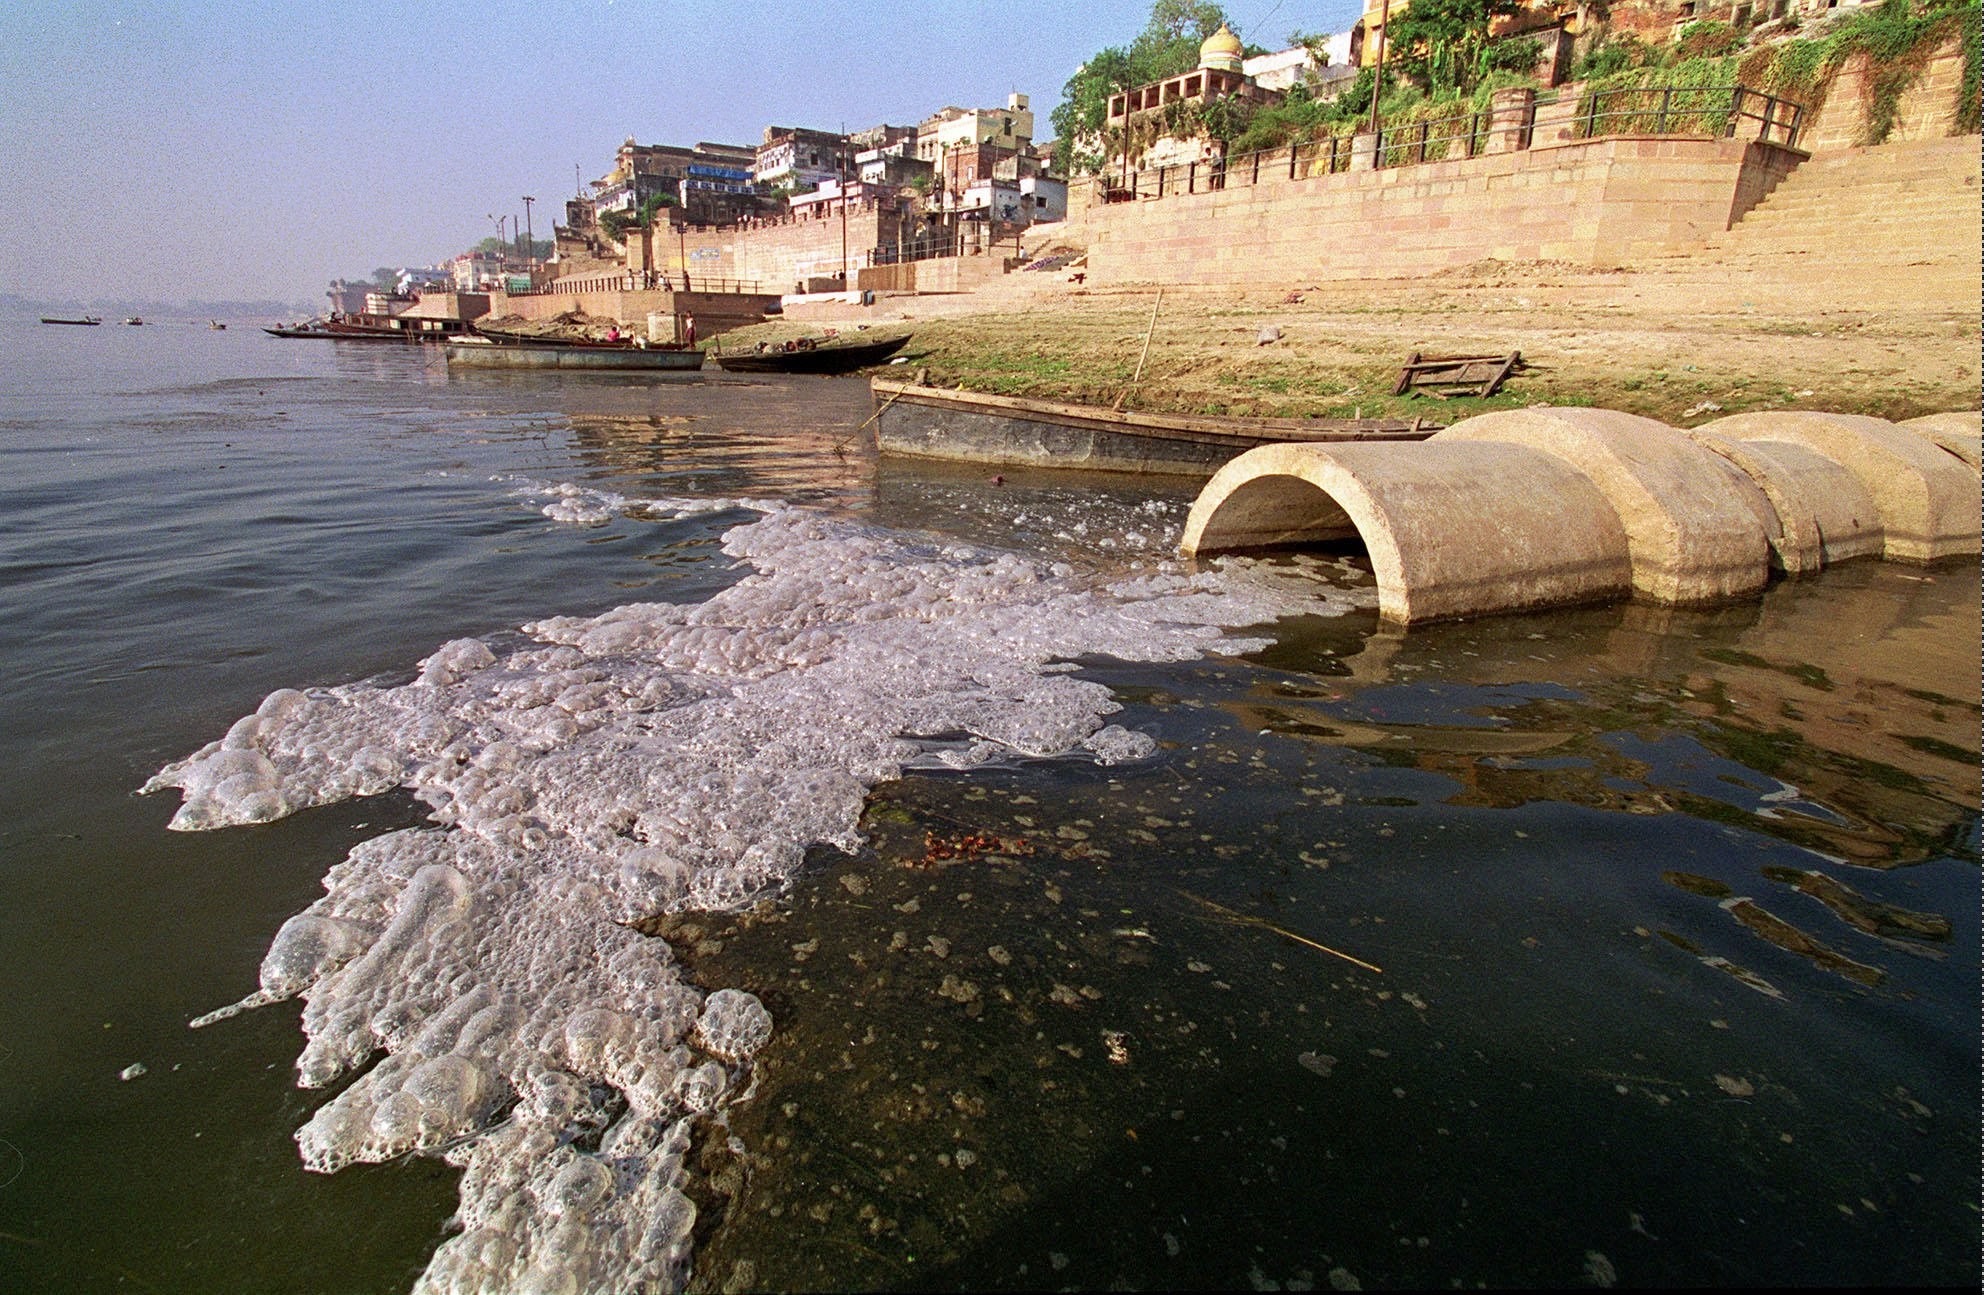 case study on industrial pollution in water bodies